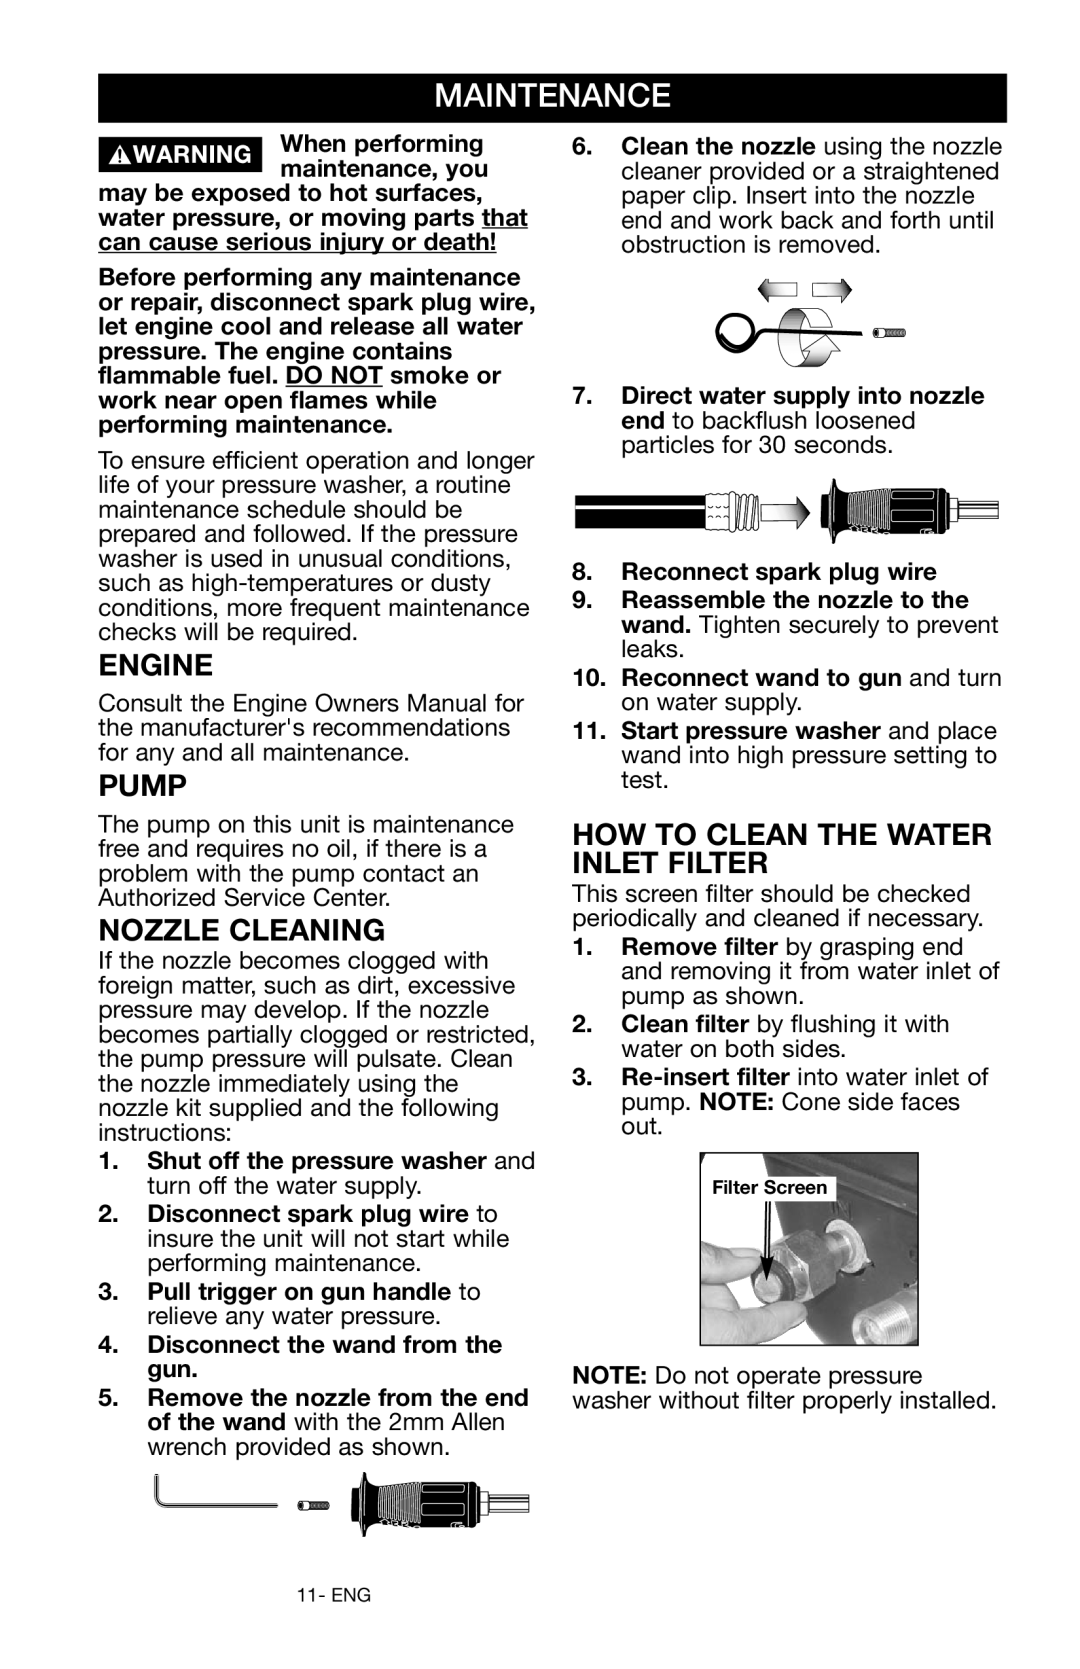 Delta DTH2450 instruction manual Maintenance, Engine, Pump, Nozzle Cleaning, How To Clean The Water Inlet Filter 